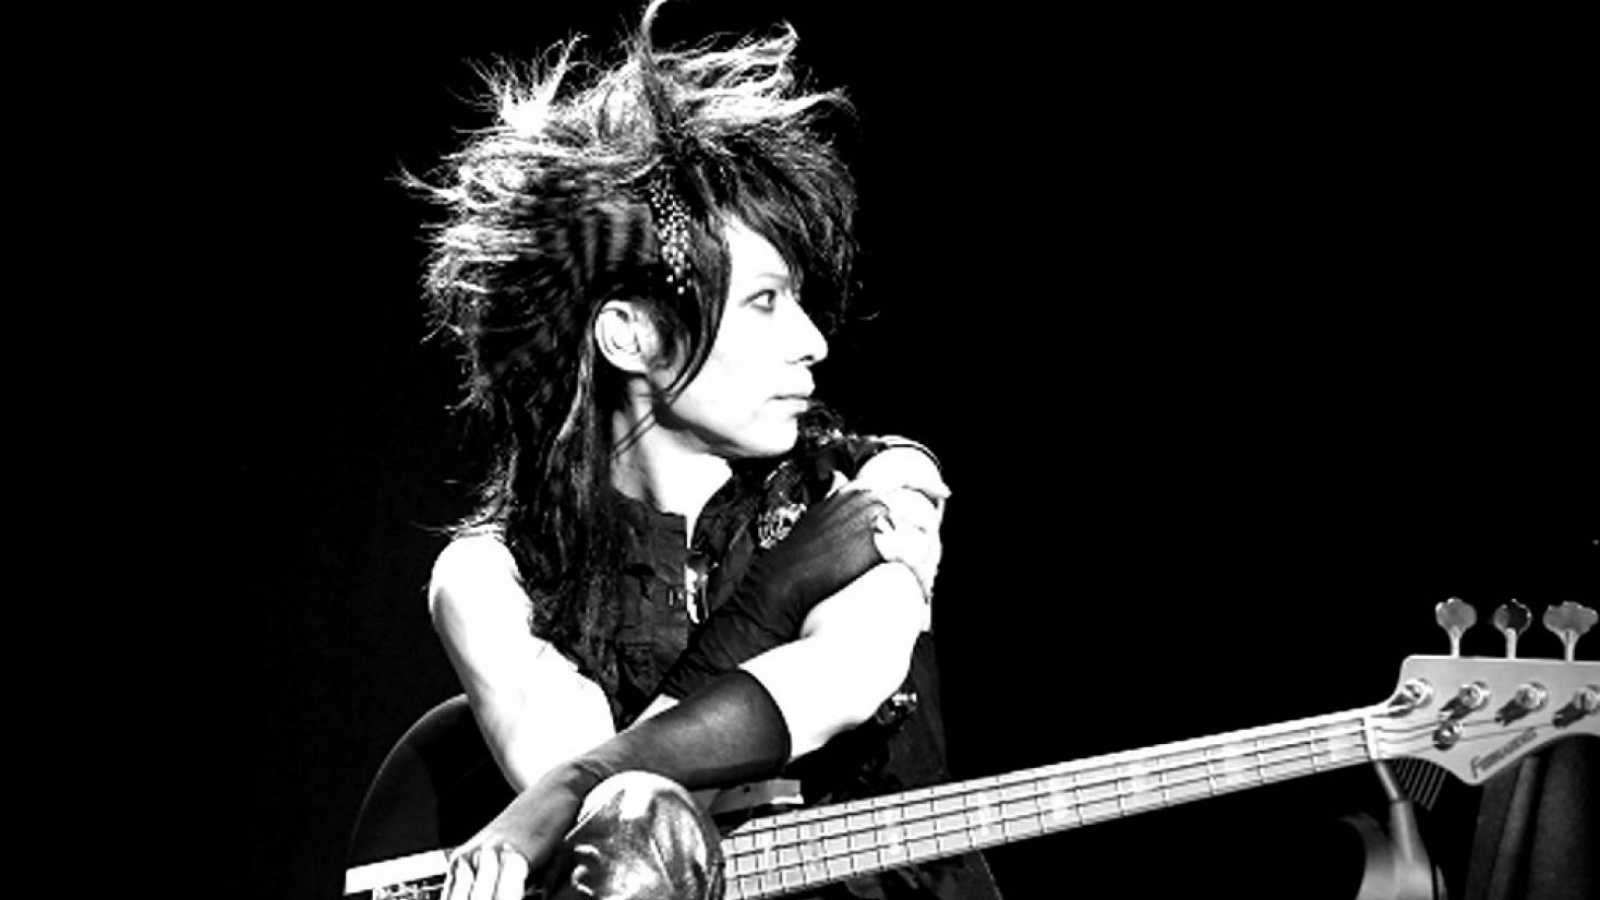 X JAPAN's HEATH Passes Away © HEATH. All rights reserved.